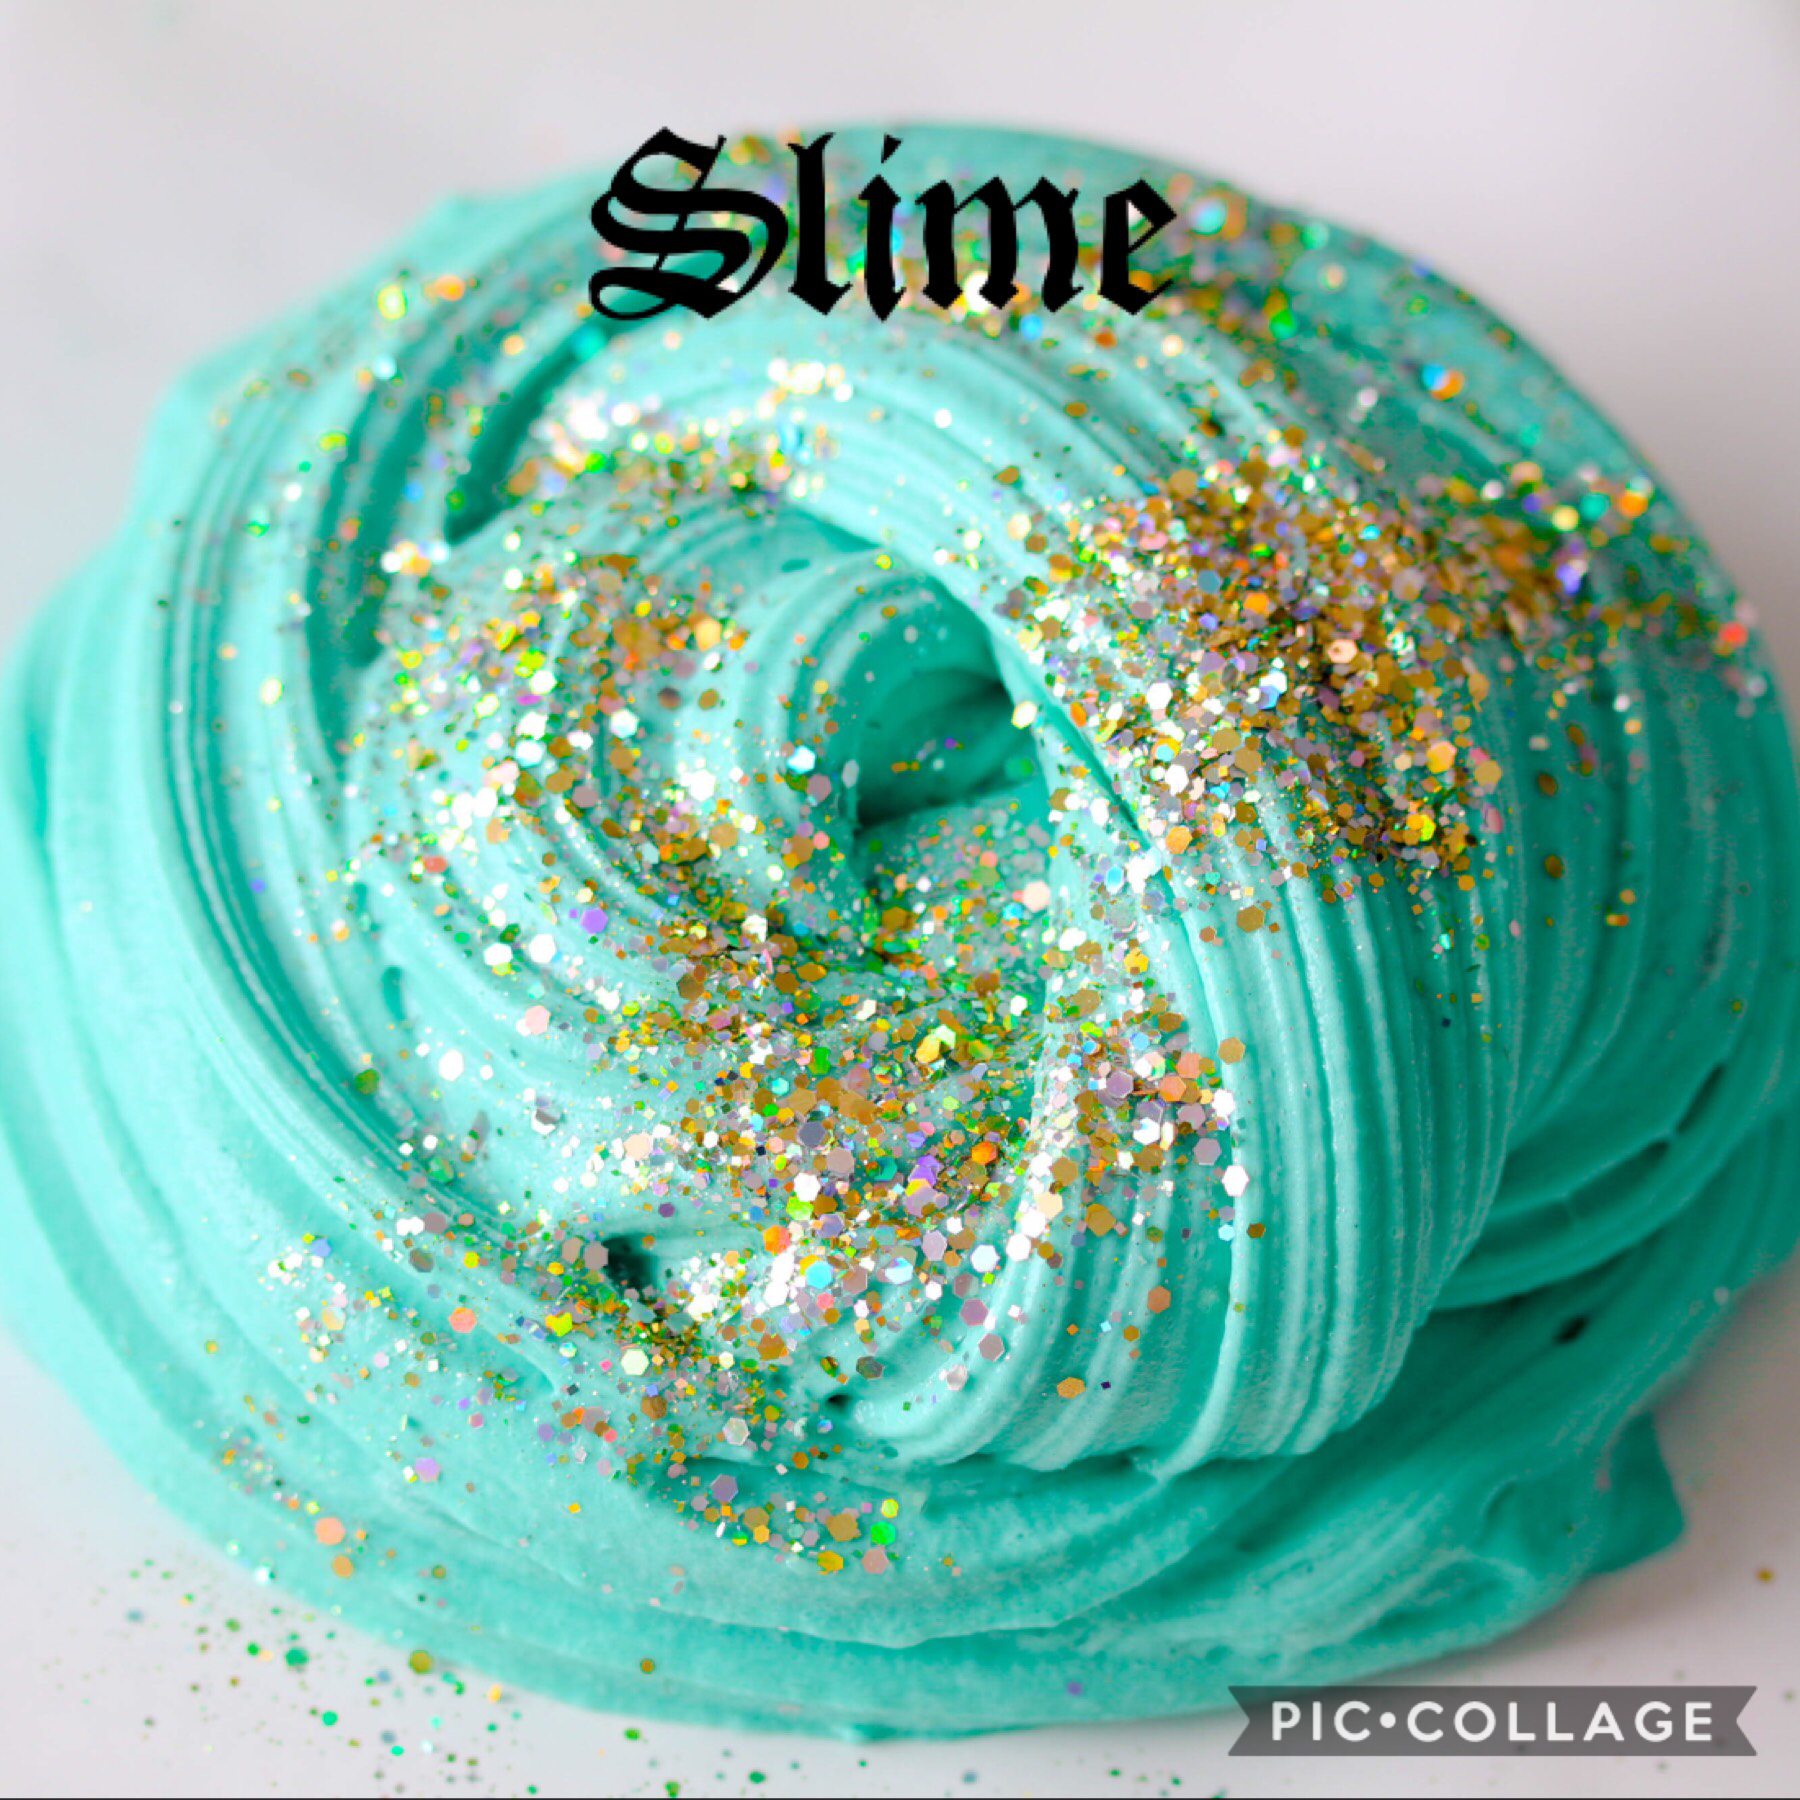 Comment “slime” for a shoutout in my next post!!